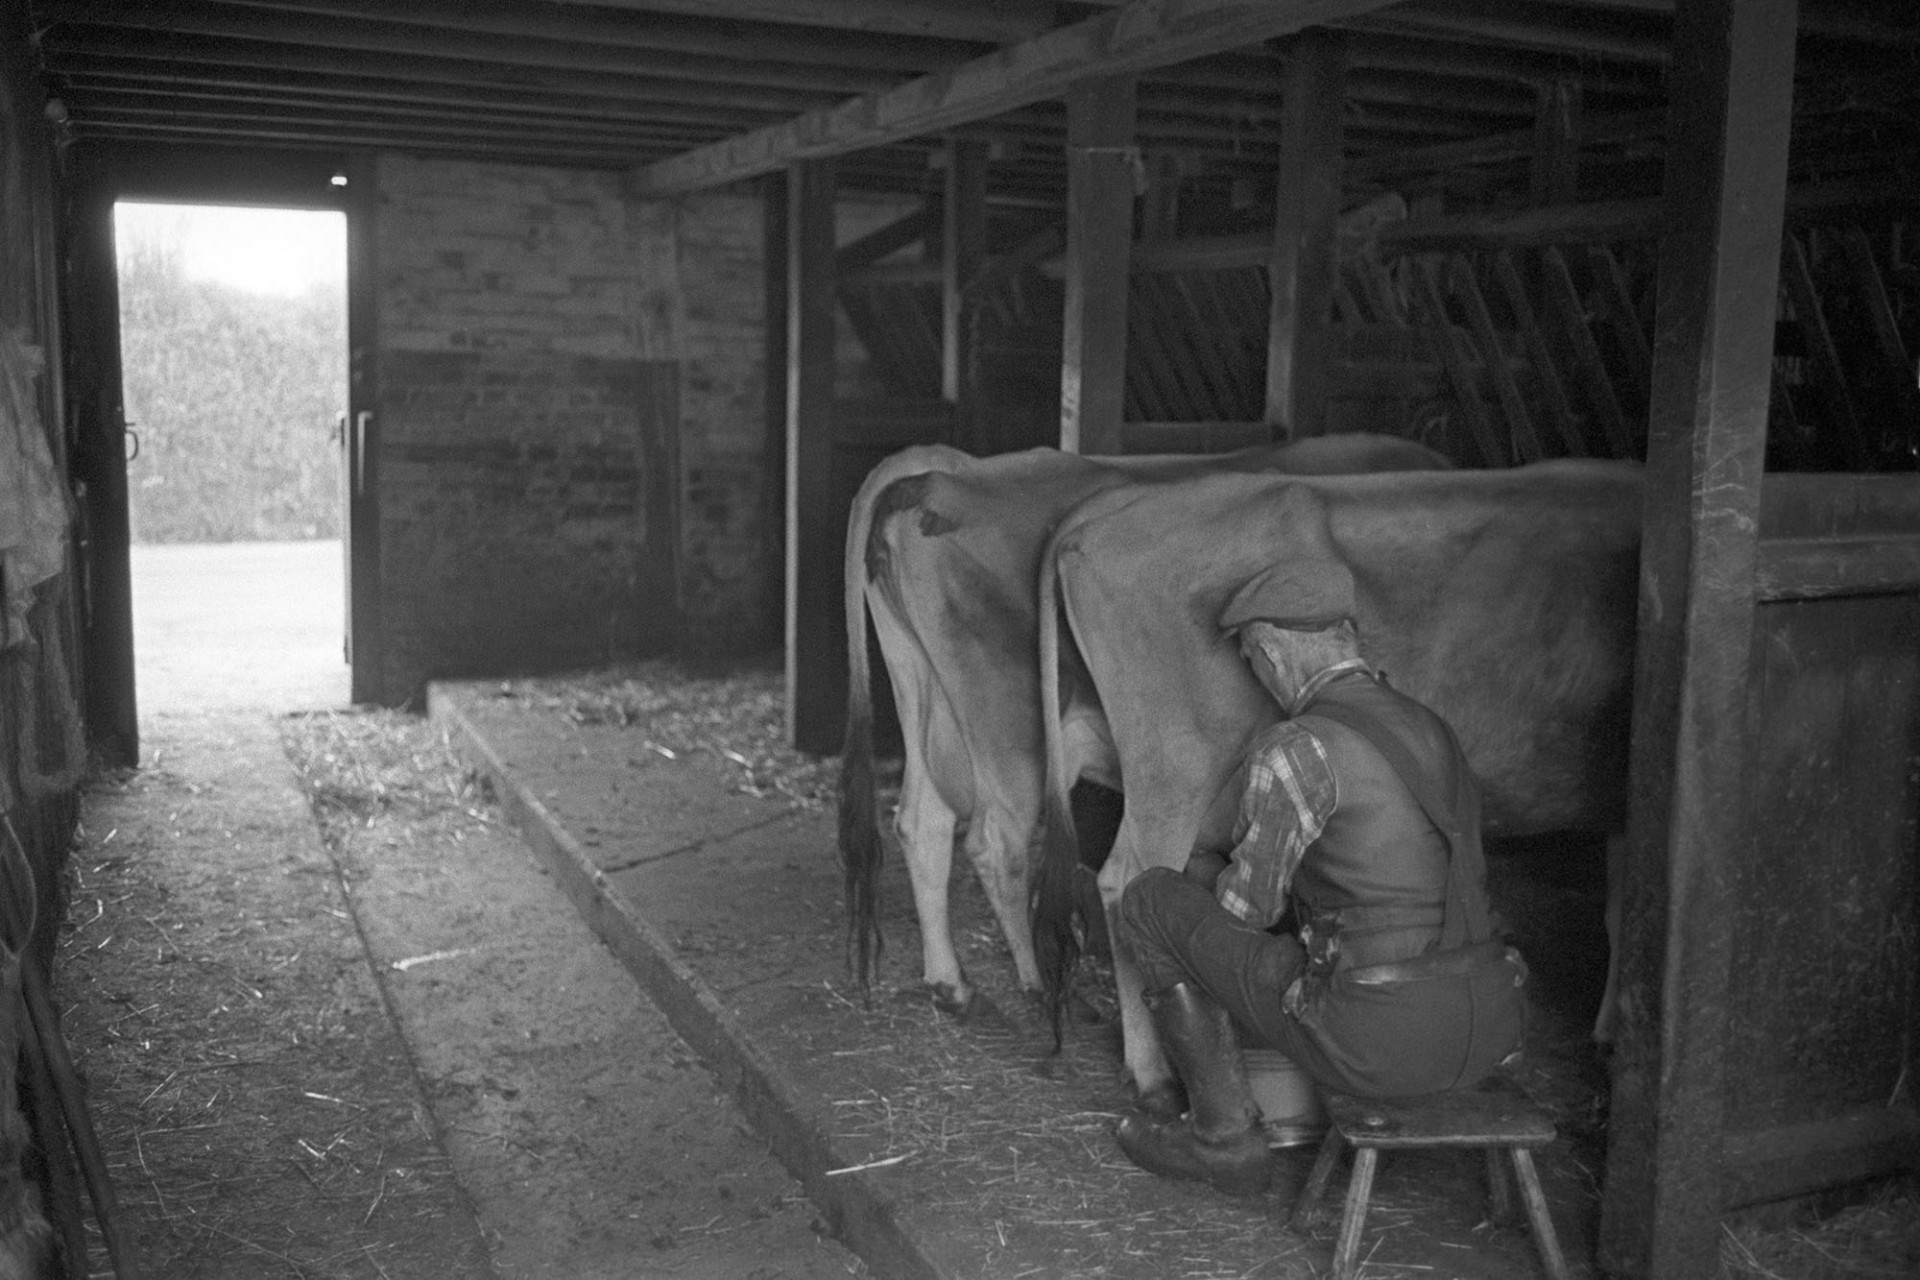 Farmer milking cow by hand.
[Gordon Sanders sitting on a stool milking a cow by hand at Reynards Park, Ashreigney. Another cow is also stood in the milking parlour.]